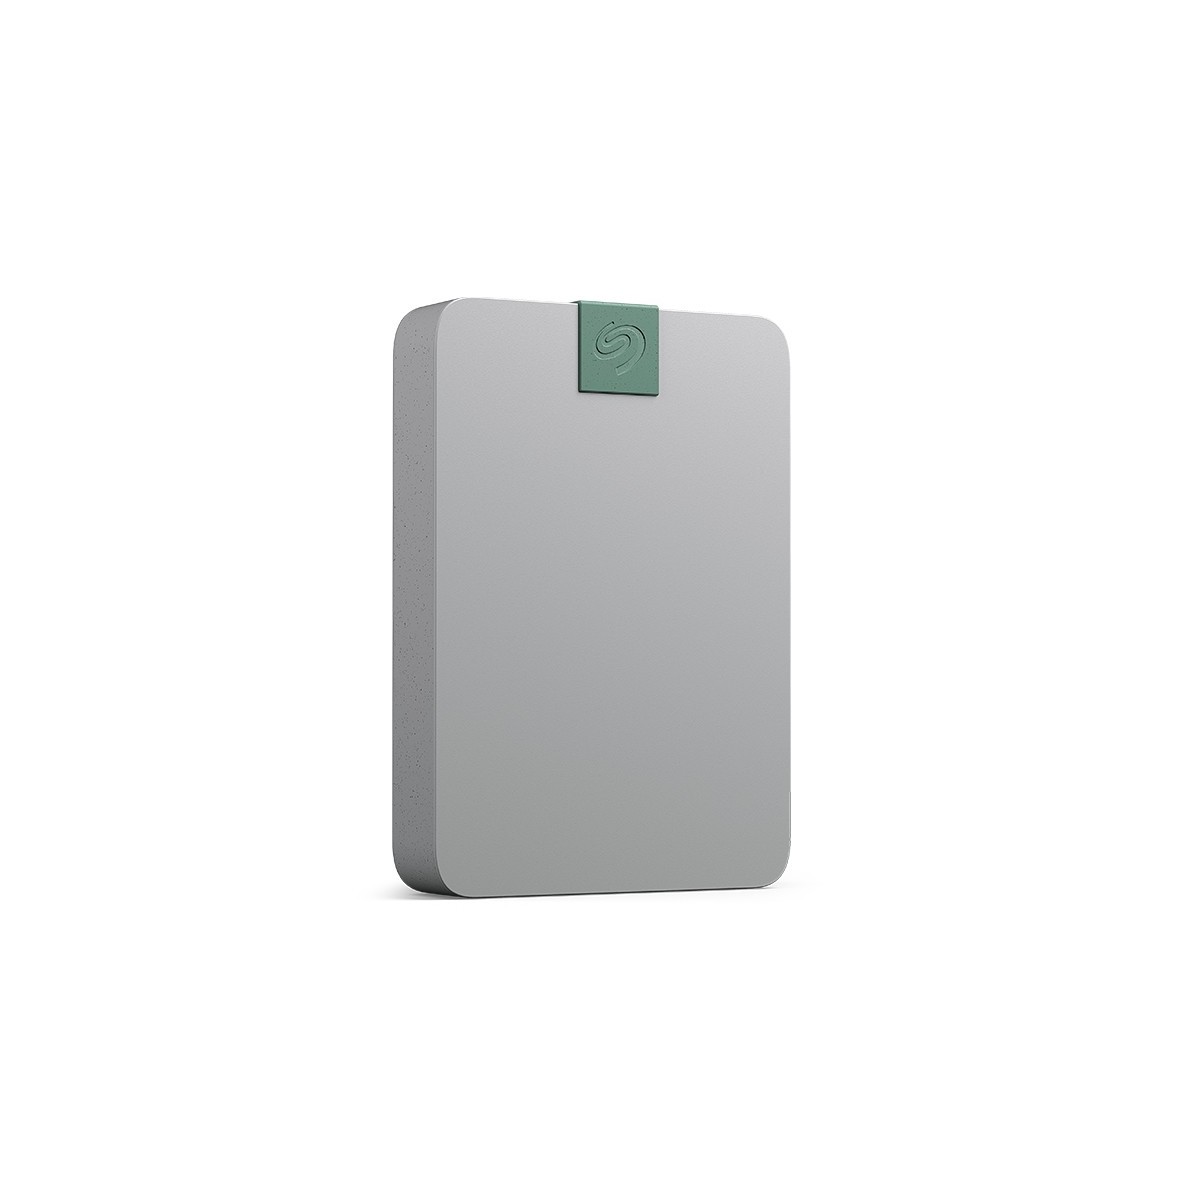 Seagate Ultra Touch 4Tb SED BASE - Hdd - 4,000 GB